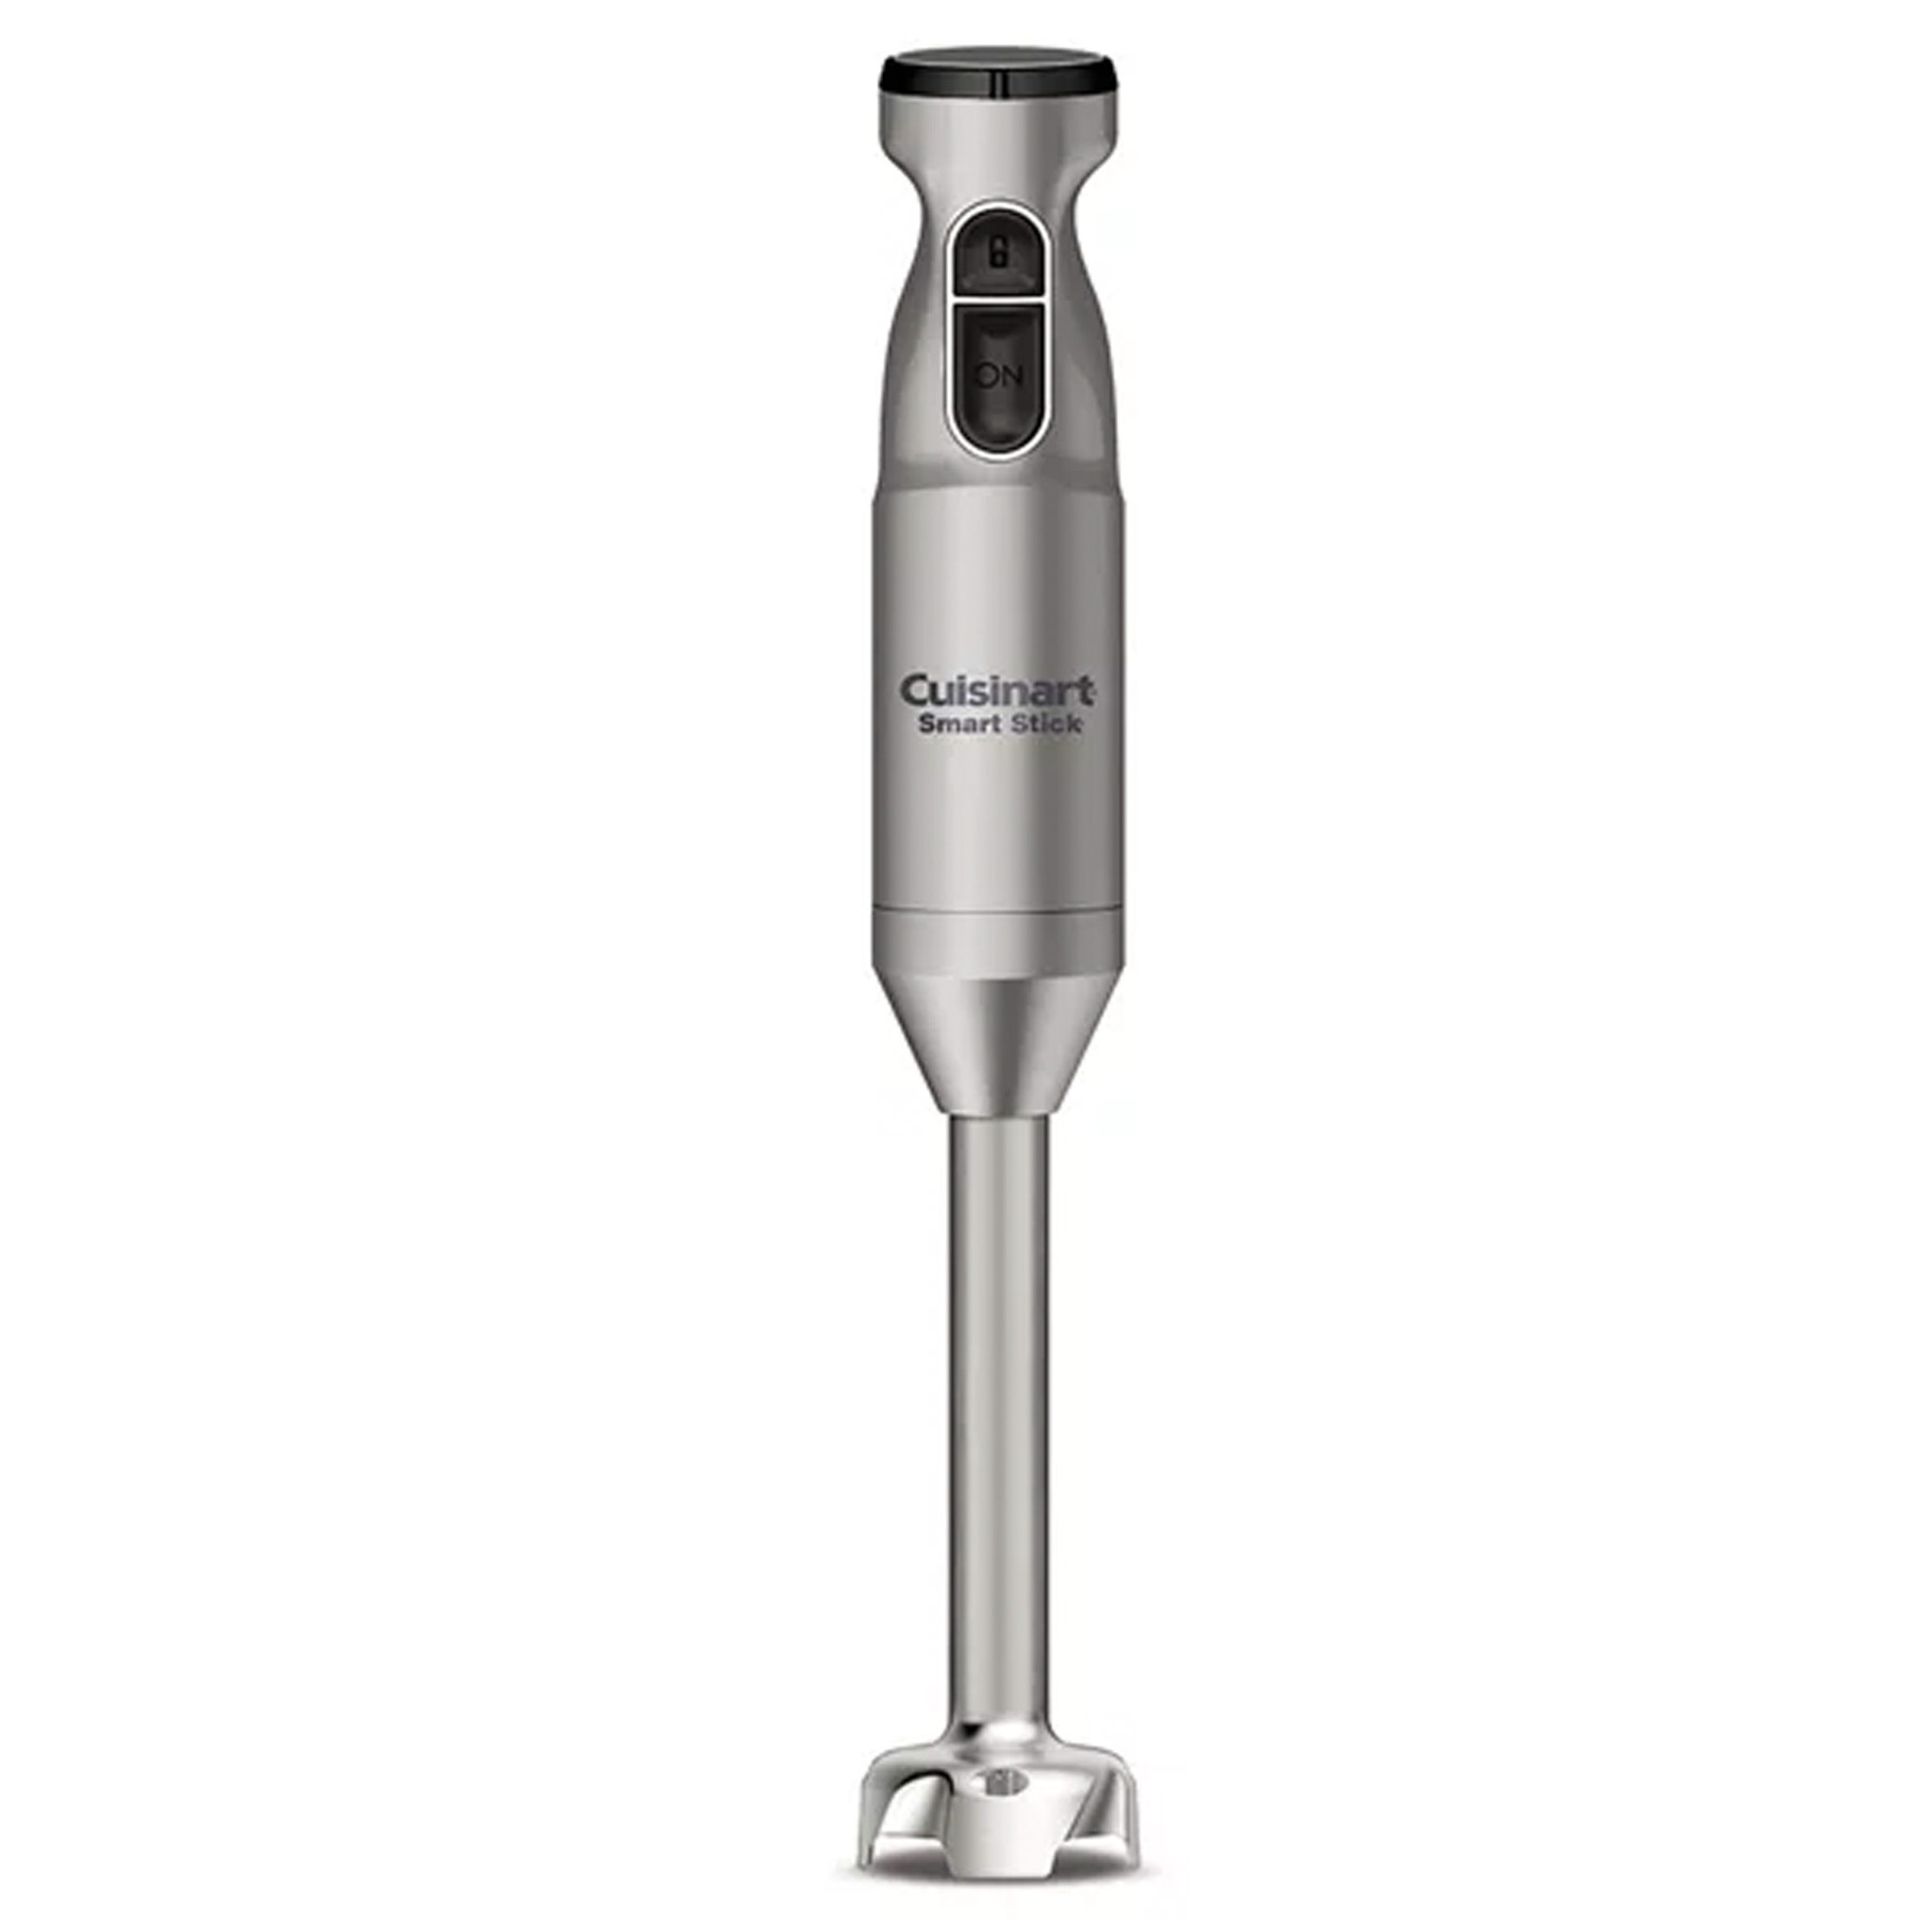 This Cuisinart Immersion Blender Changed My Summer